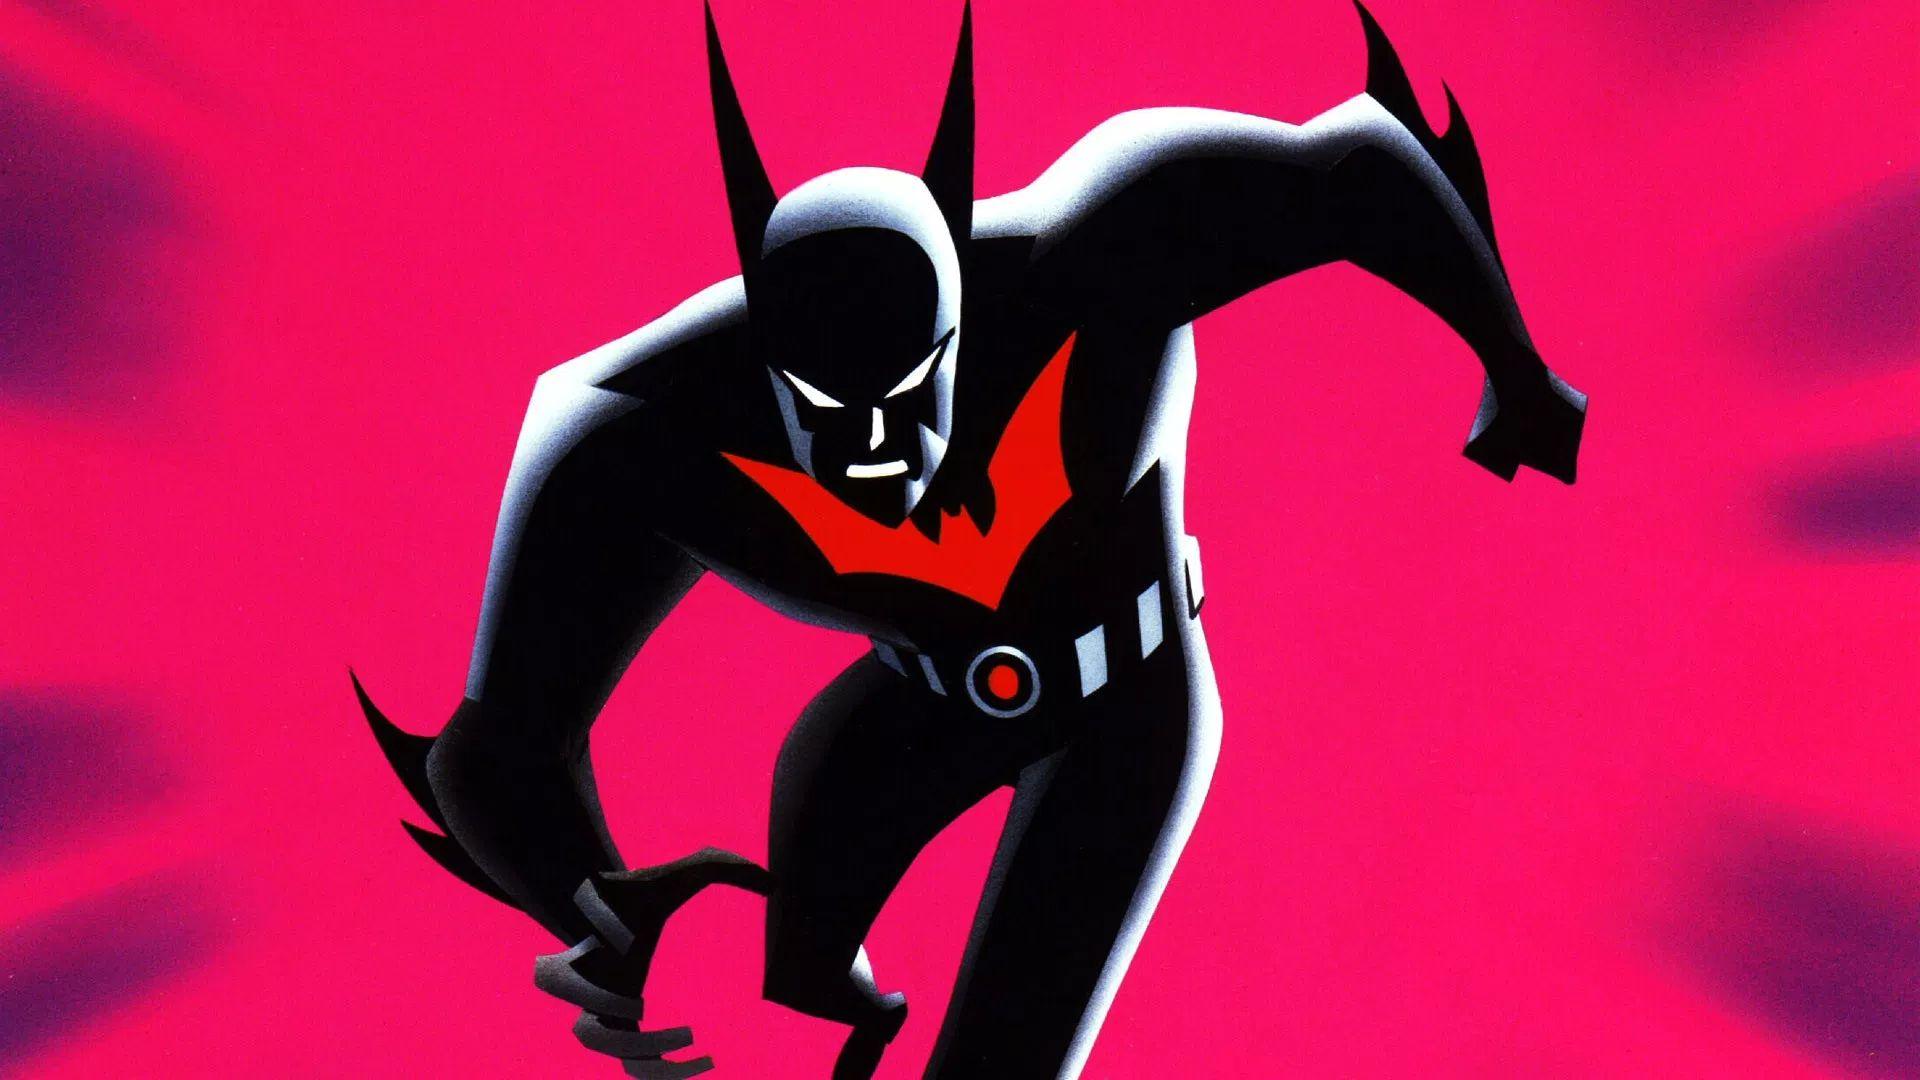 WB Reportedly Looking For Asian American To Voice Terry McGinnis